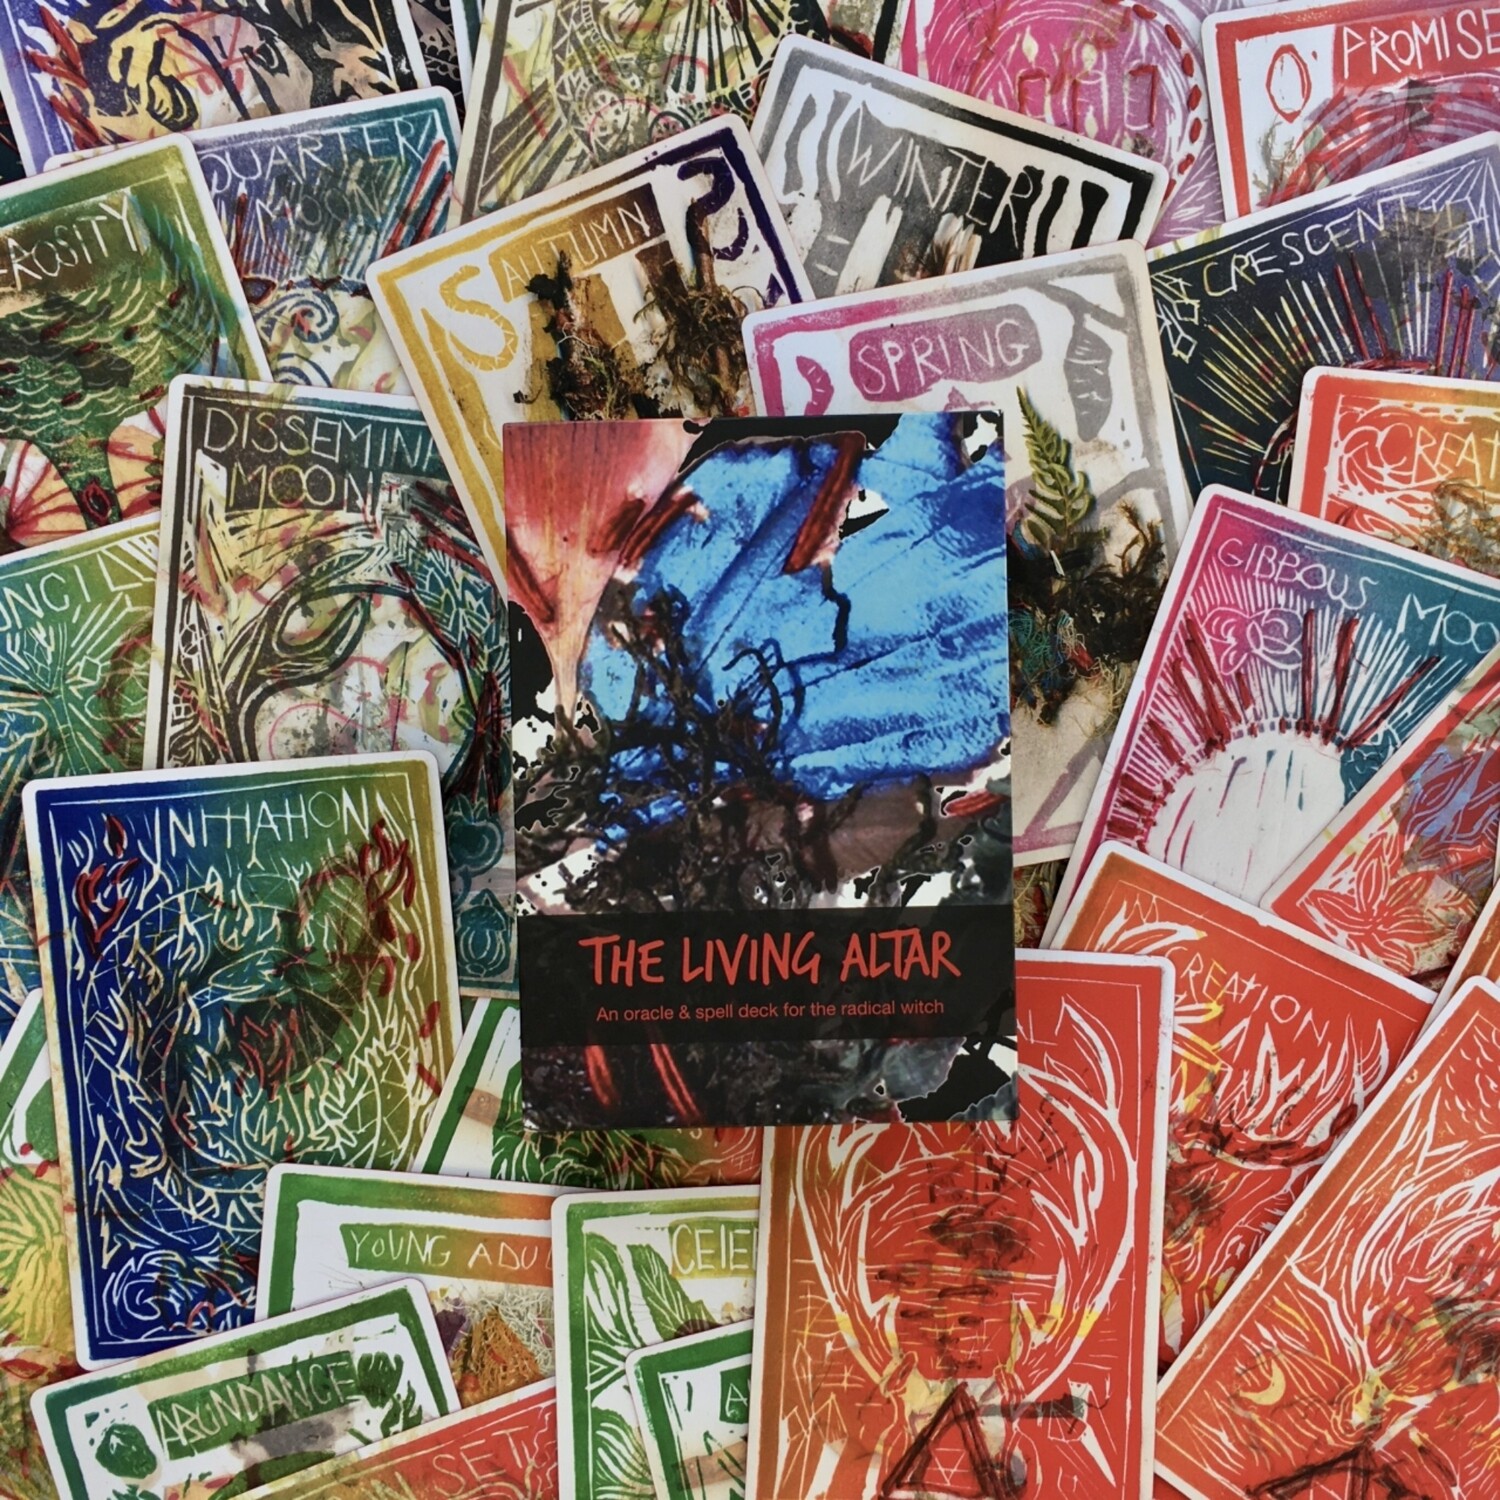 The Living Altar: An Oracle & Spell Deck for the Radical Witch